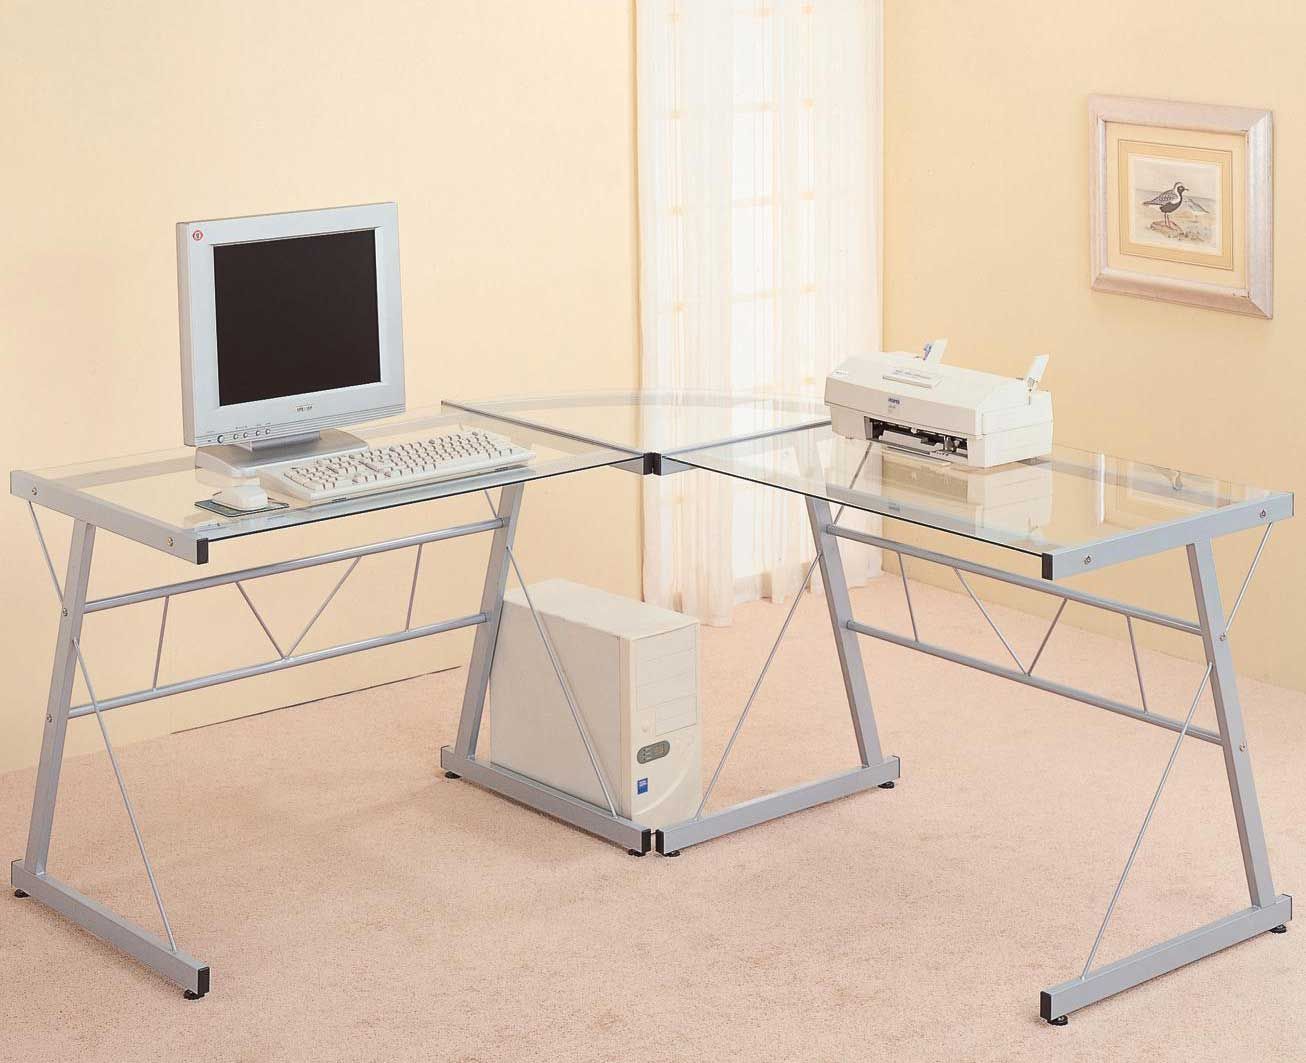 Modern Glass Desks For Flexible Work Intended For Metal And Glass Work Station Desks (View 11 of 15)